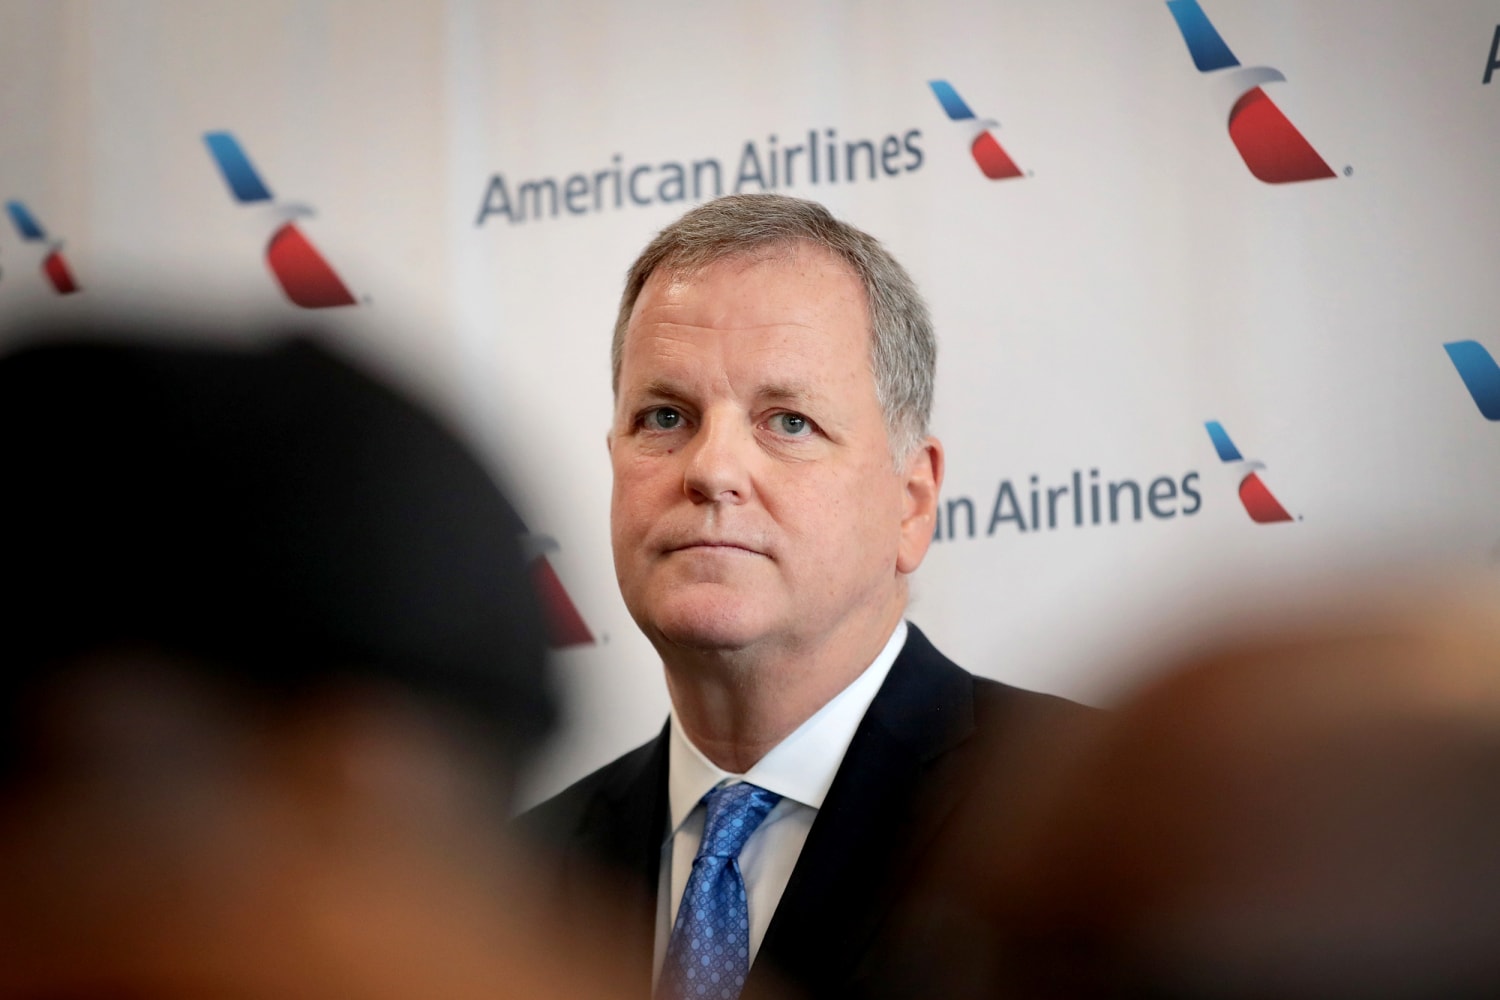 Transcript: American Airlines CEO Doug Parker on Face the Nation,  September 27, 2020 - CBS News